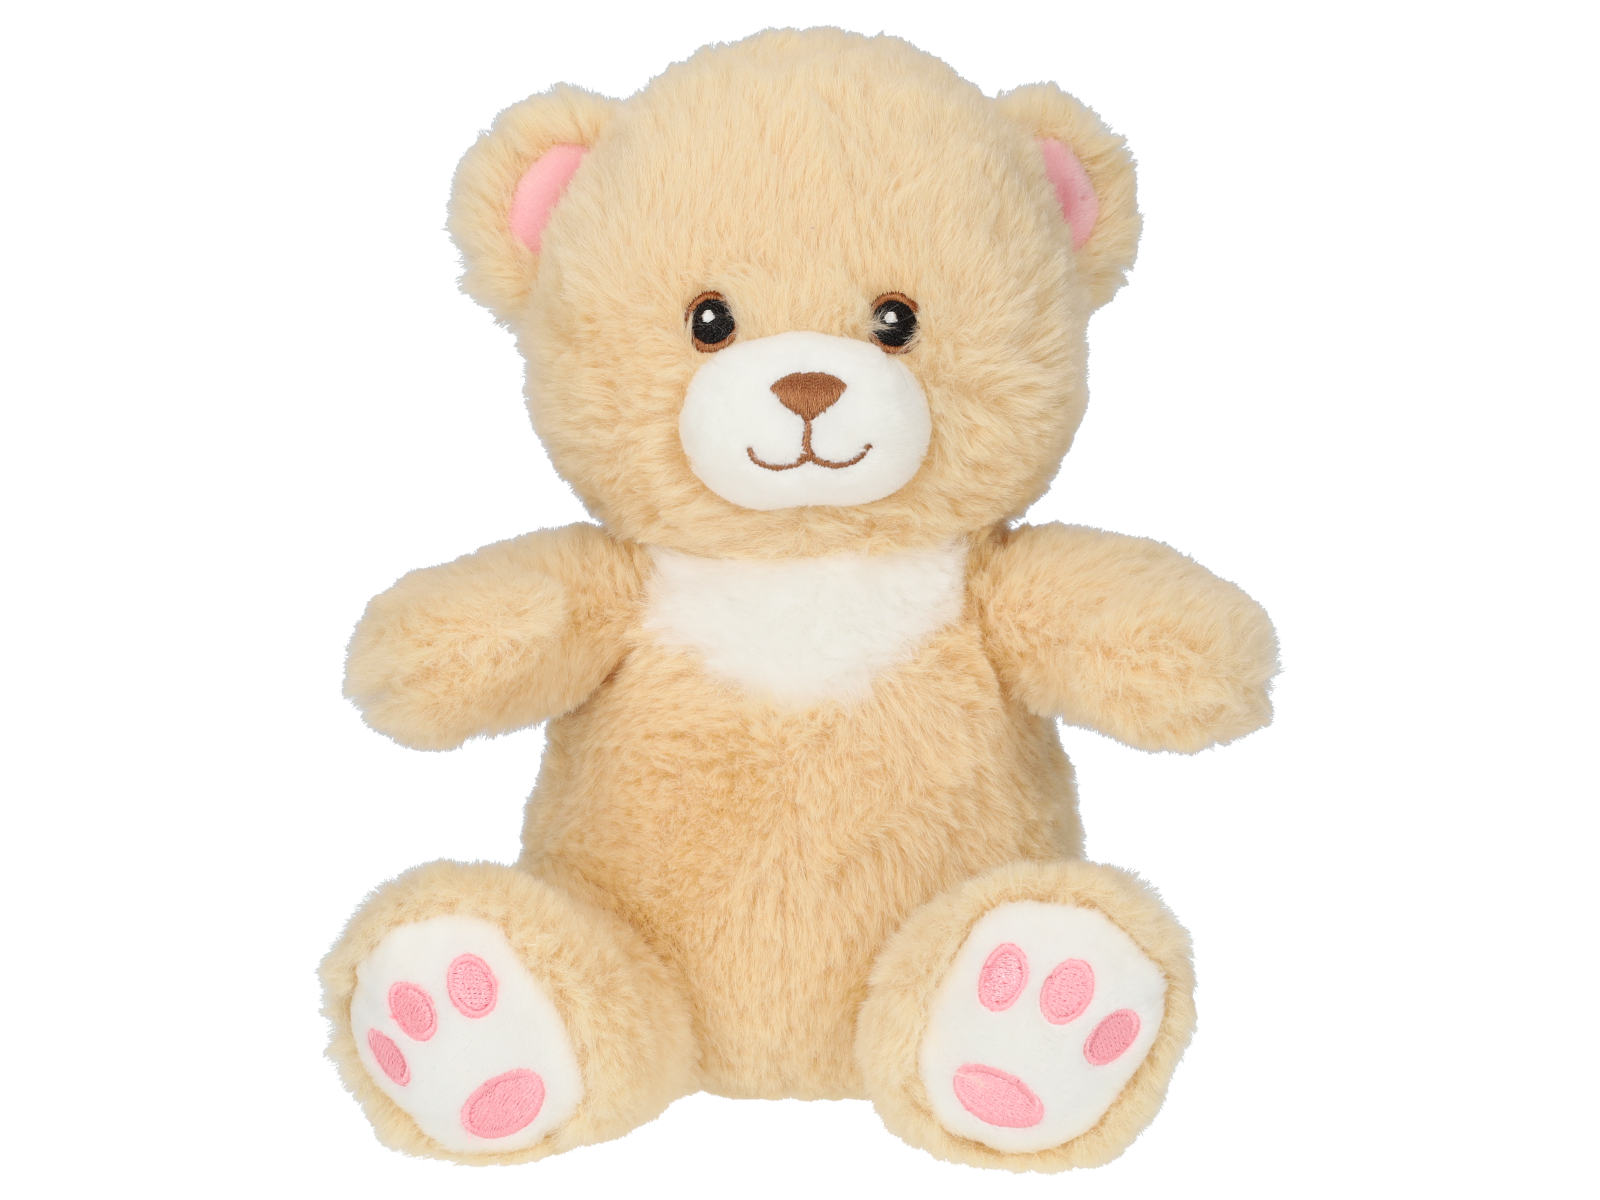 Mbw - +++ FDS 260923 +++ Peluche nounours ours - 60328 beige